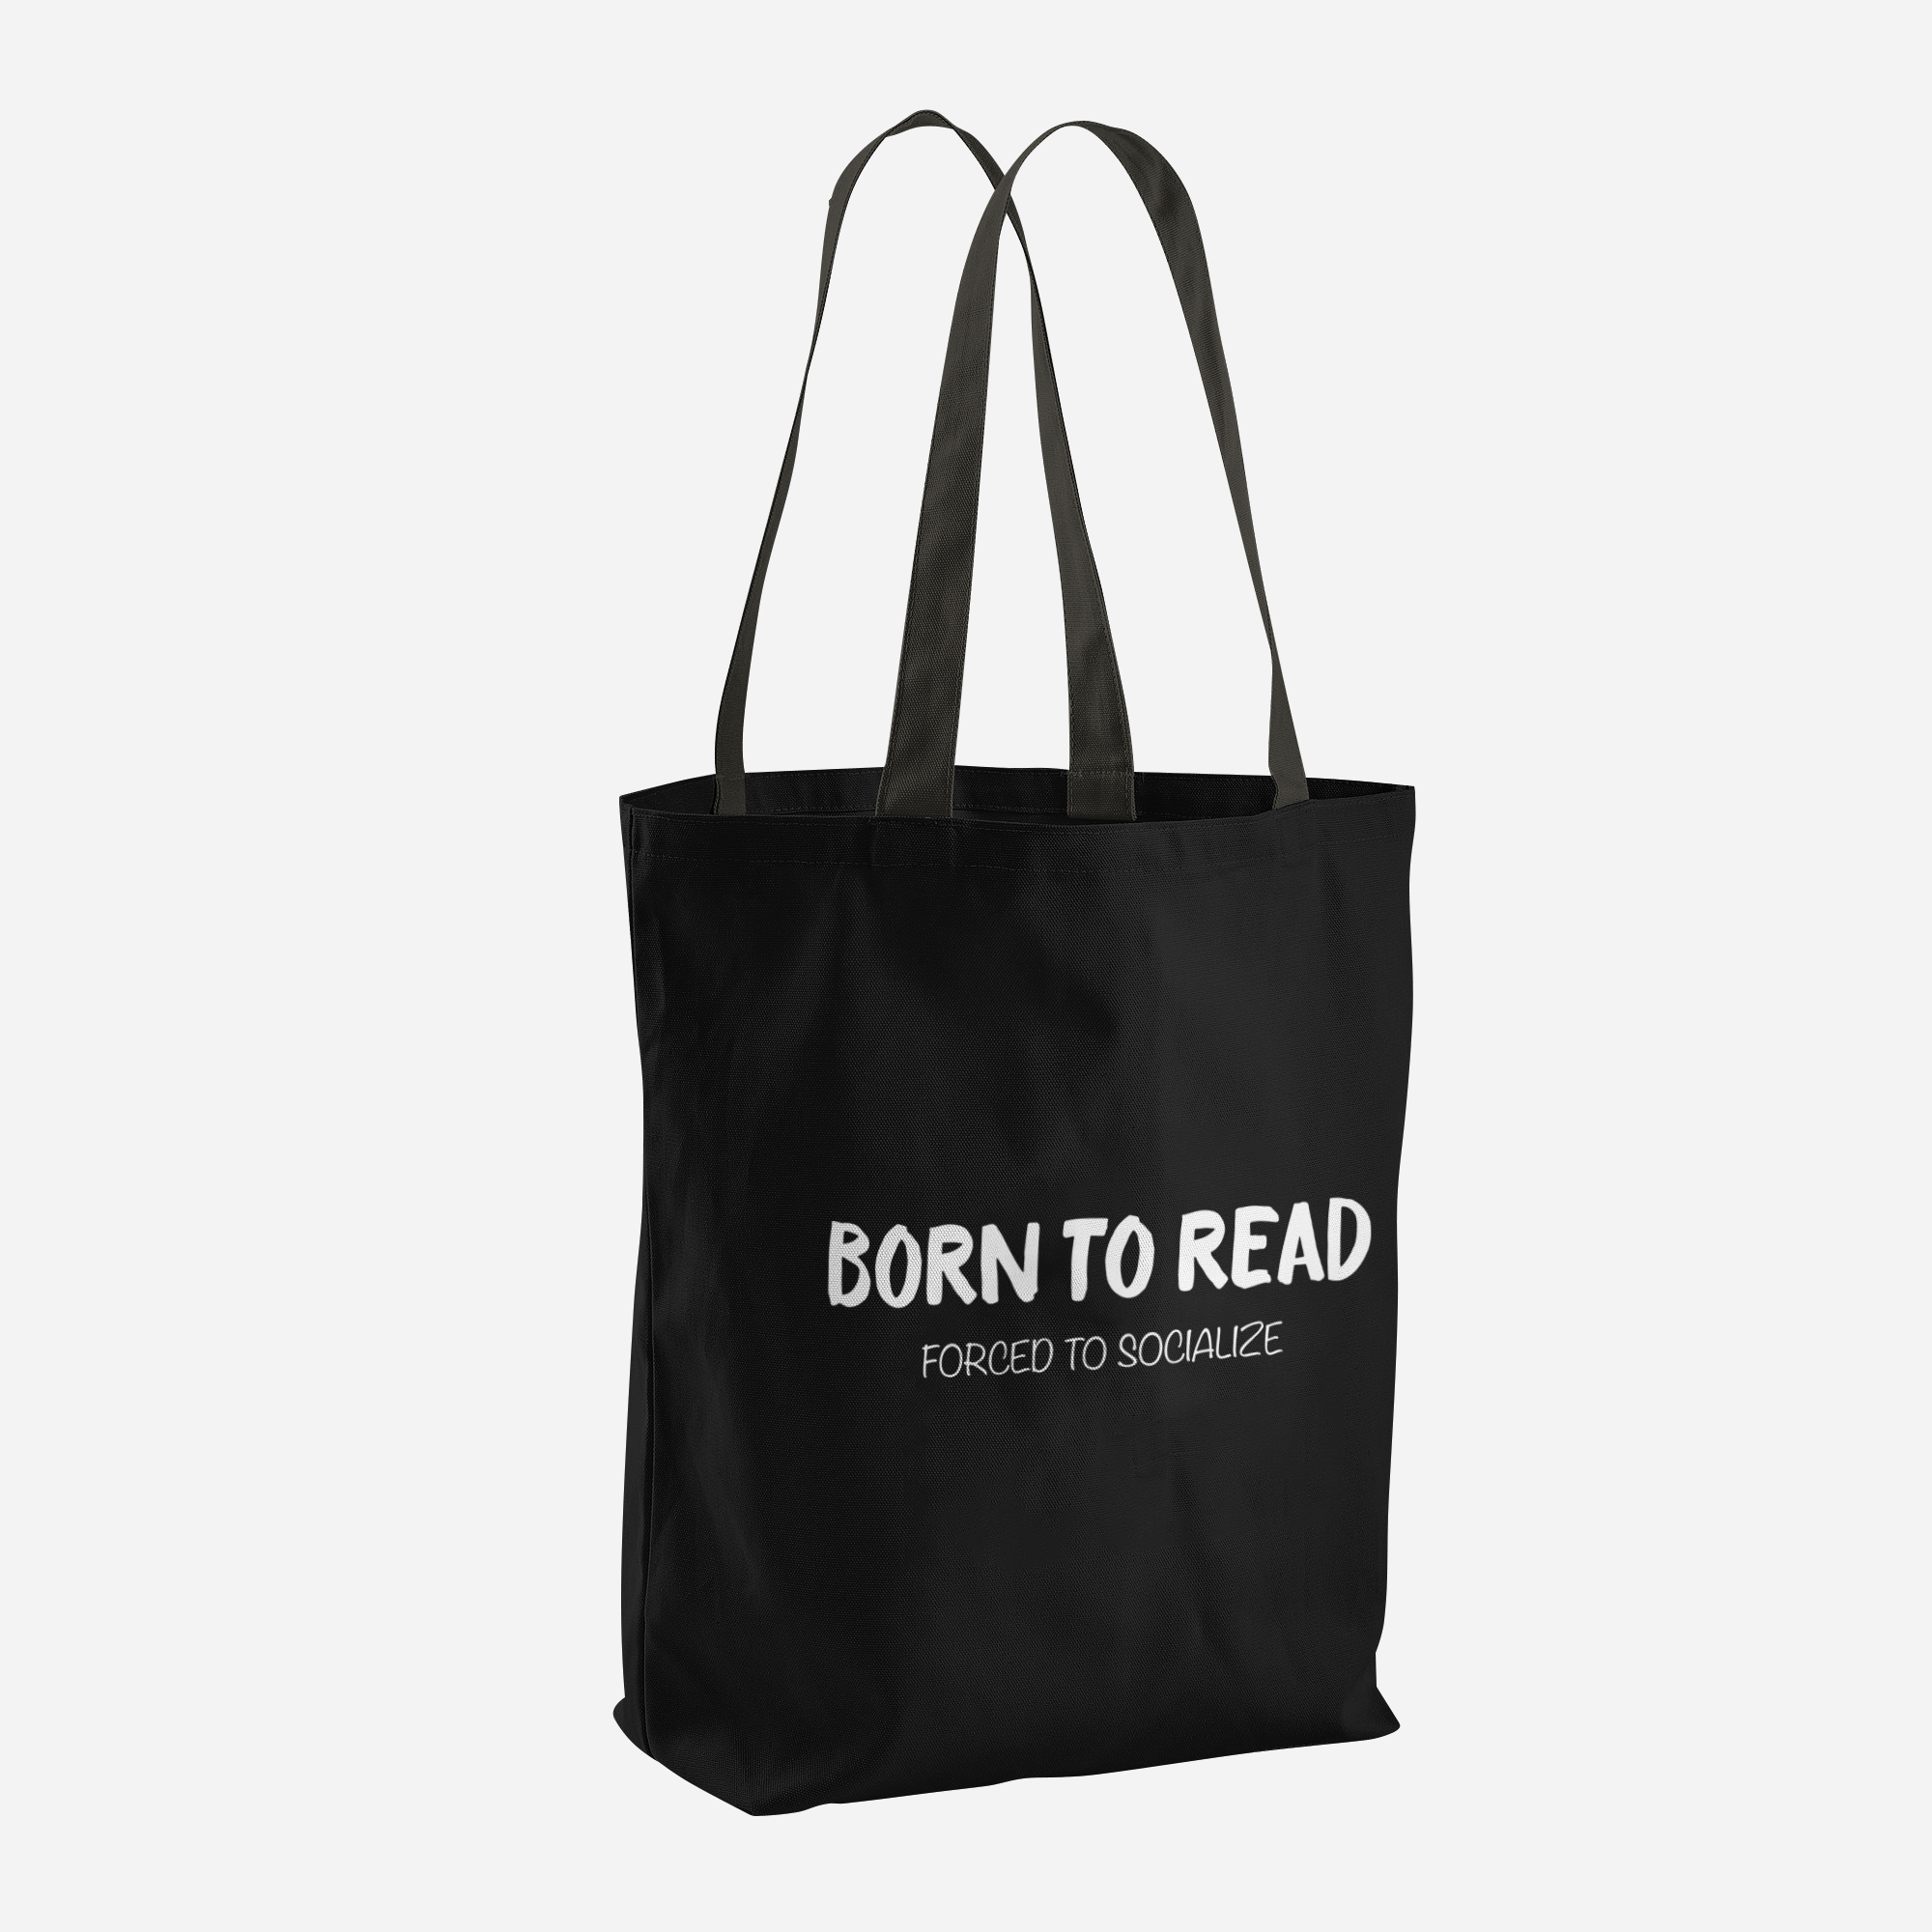 BORN TO READ. Forced to Socialize. Tote Bag - LitLifeCo.